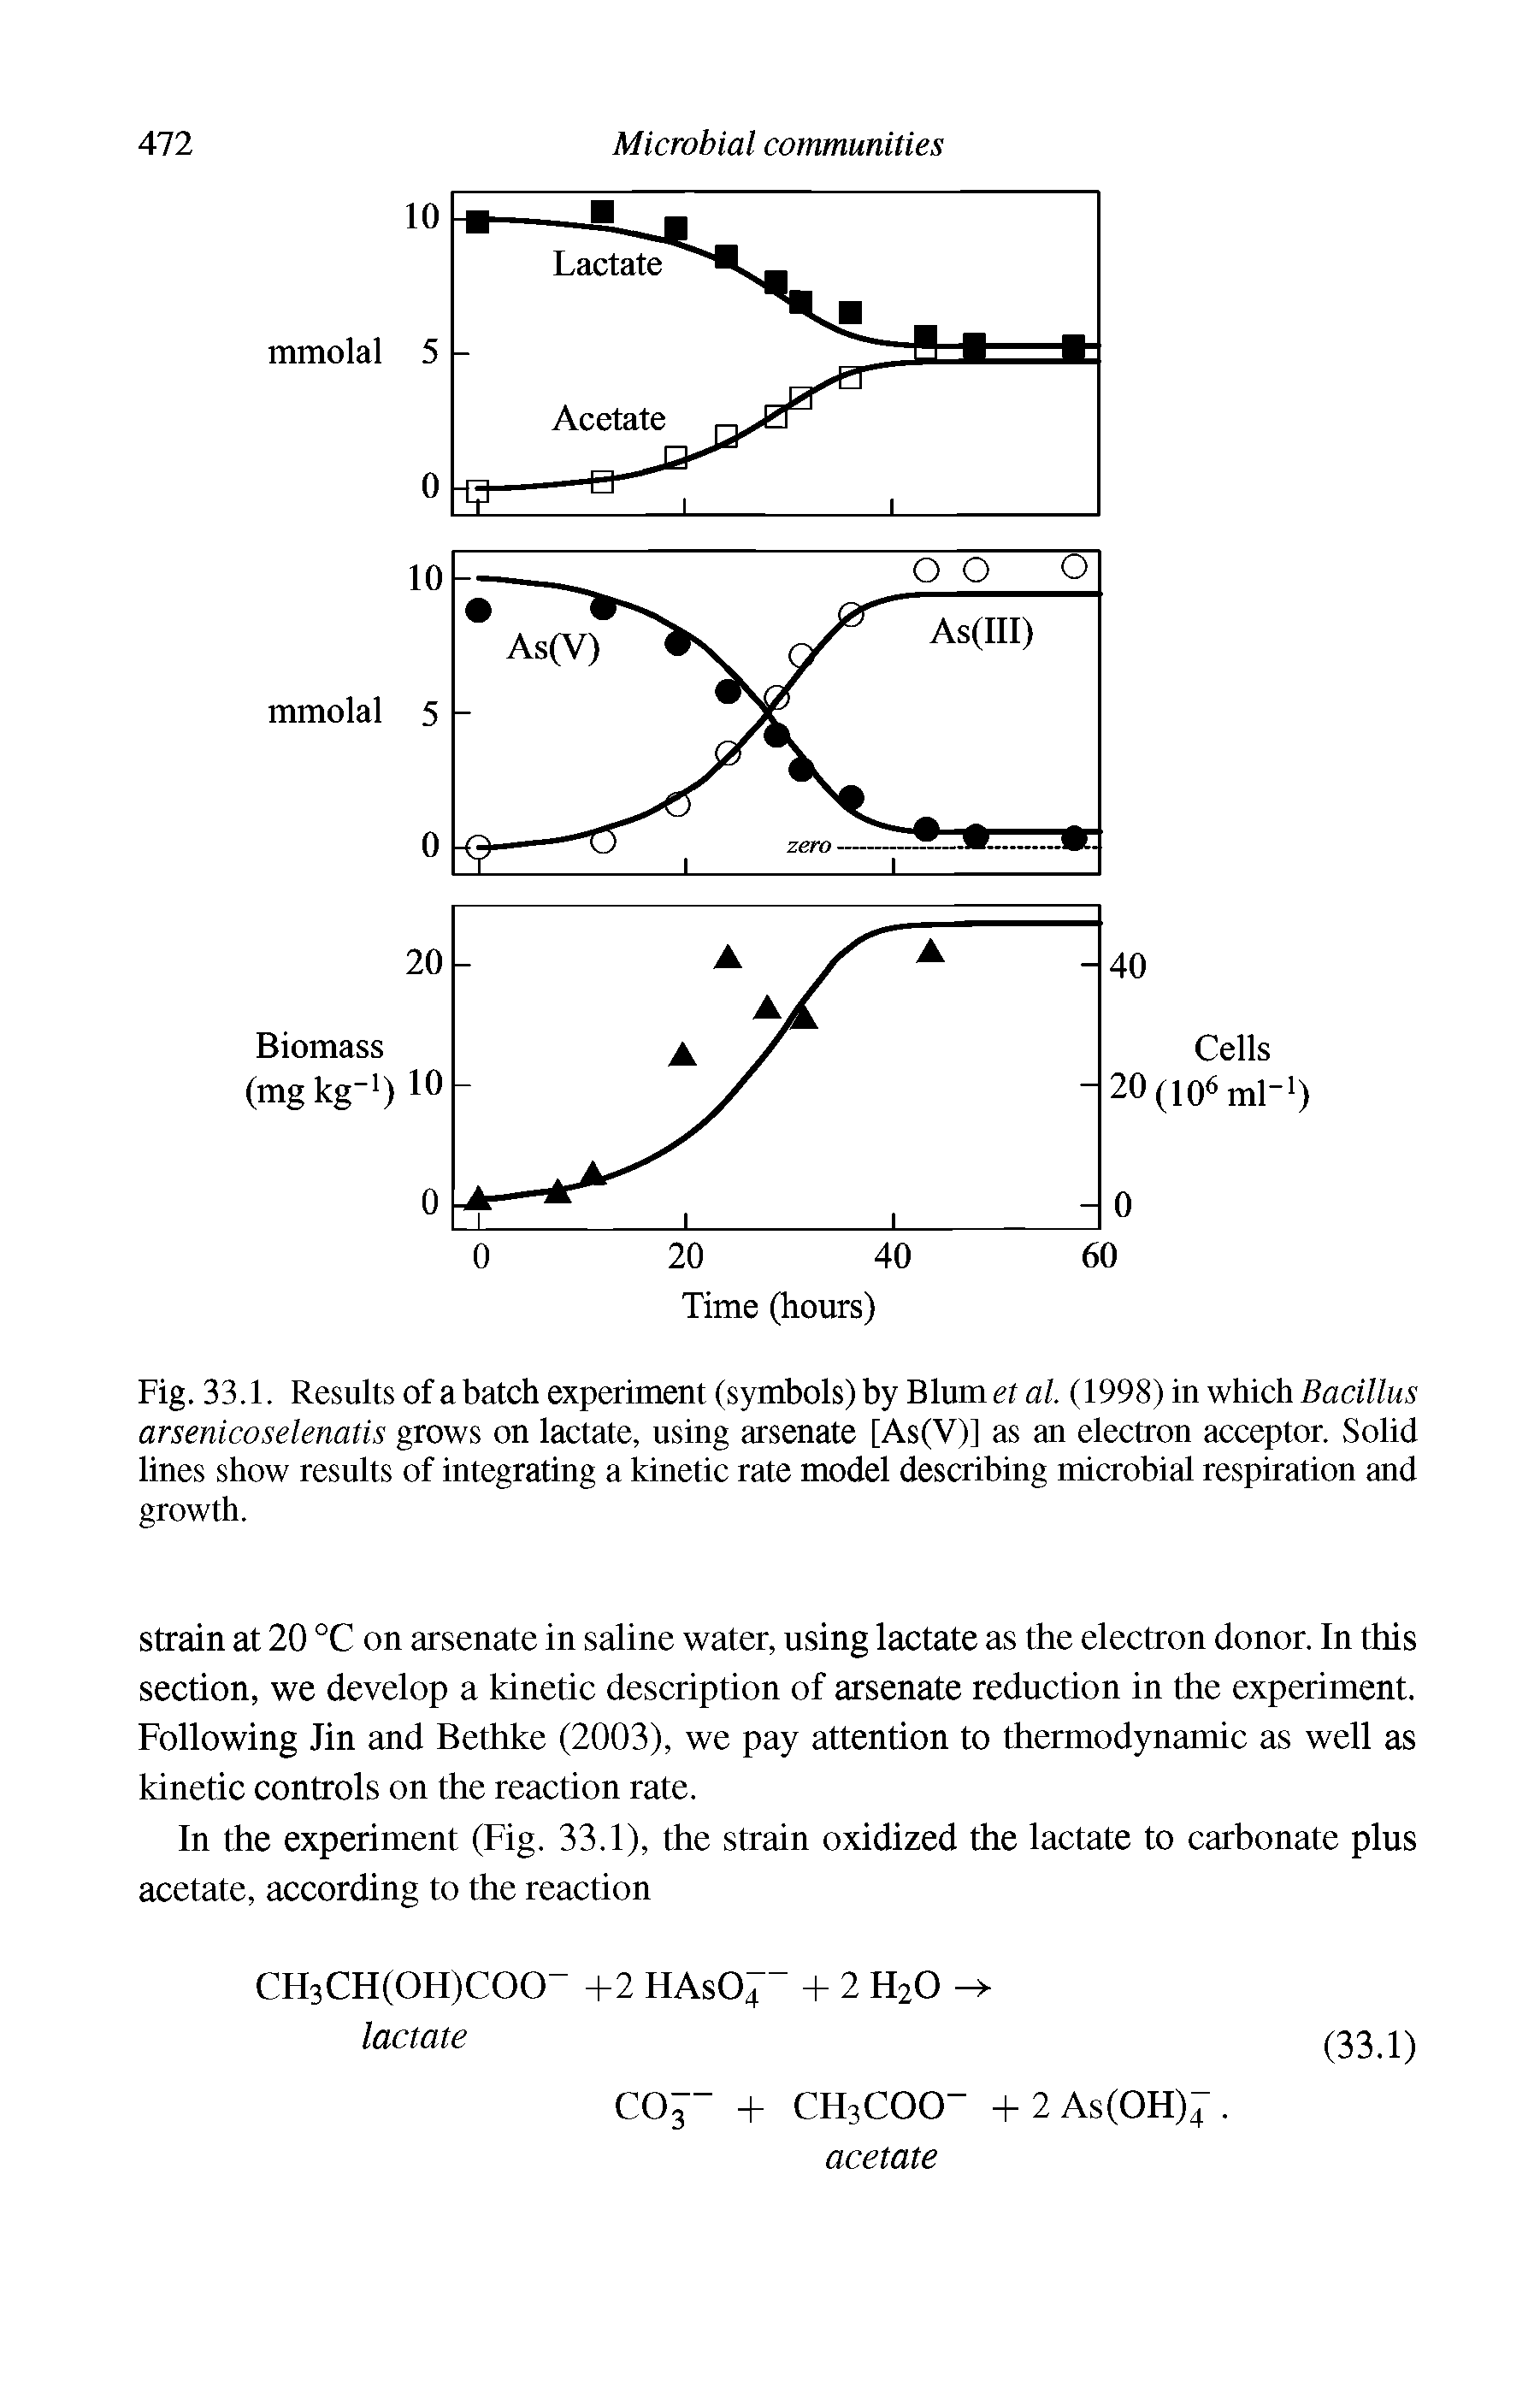 Fig. 33.1. Results of a batch experiment (symbols) by Blum et al. (1998) in which Bacillus arsenicoselenatis grows on lactate, using arsenate [As(V)] as an electron acceptor. Solid lines show results of integrating a kinetic rate model describing microbial respiration and growth.